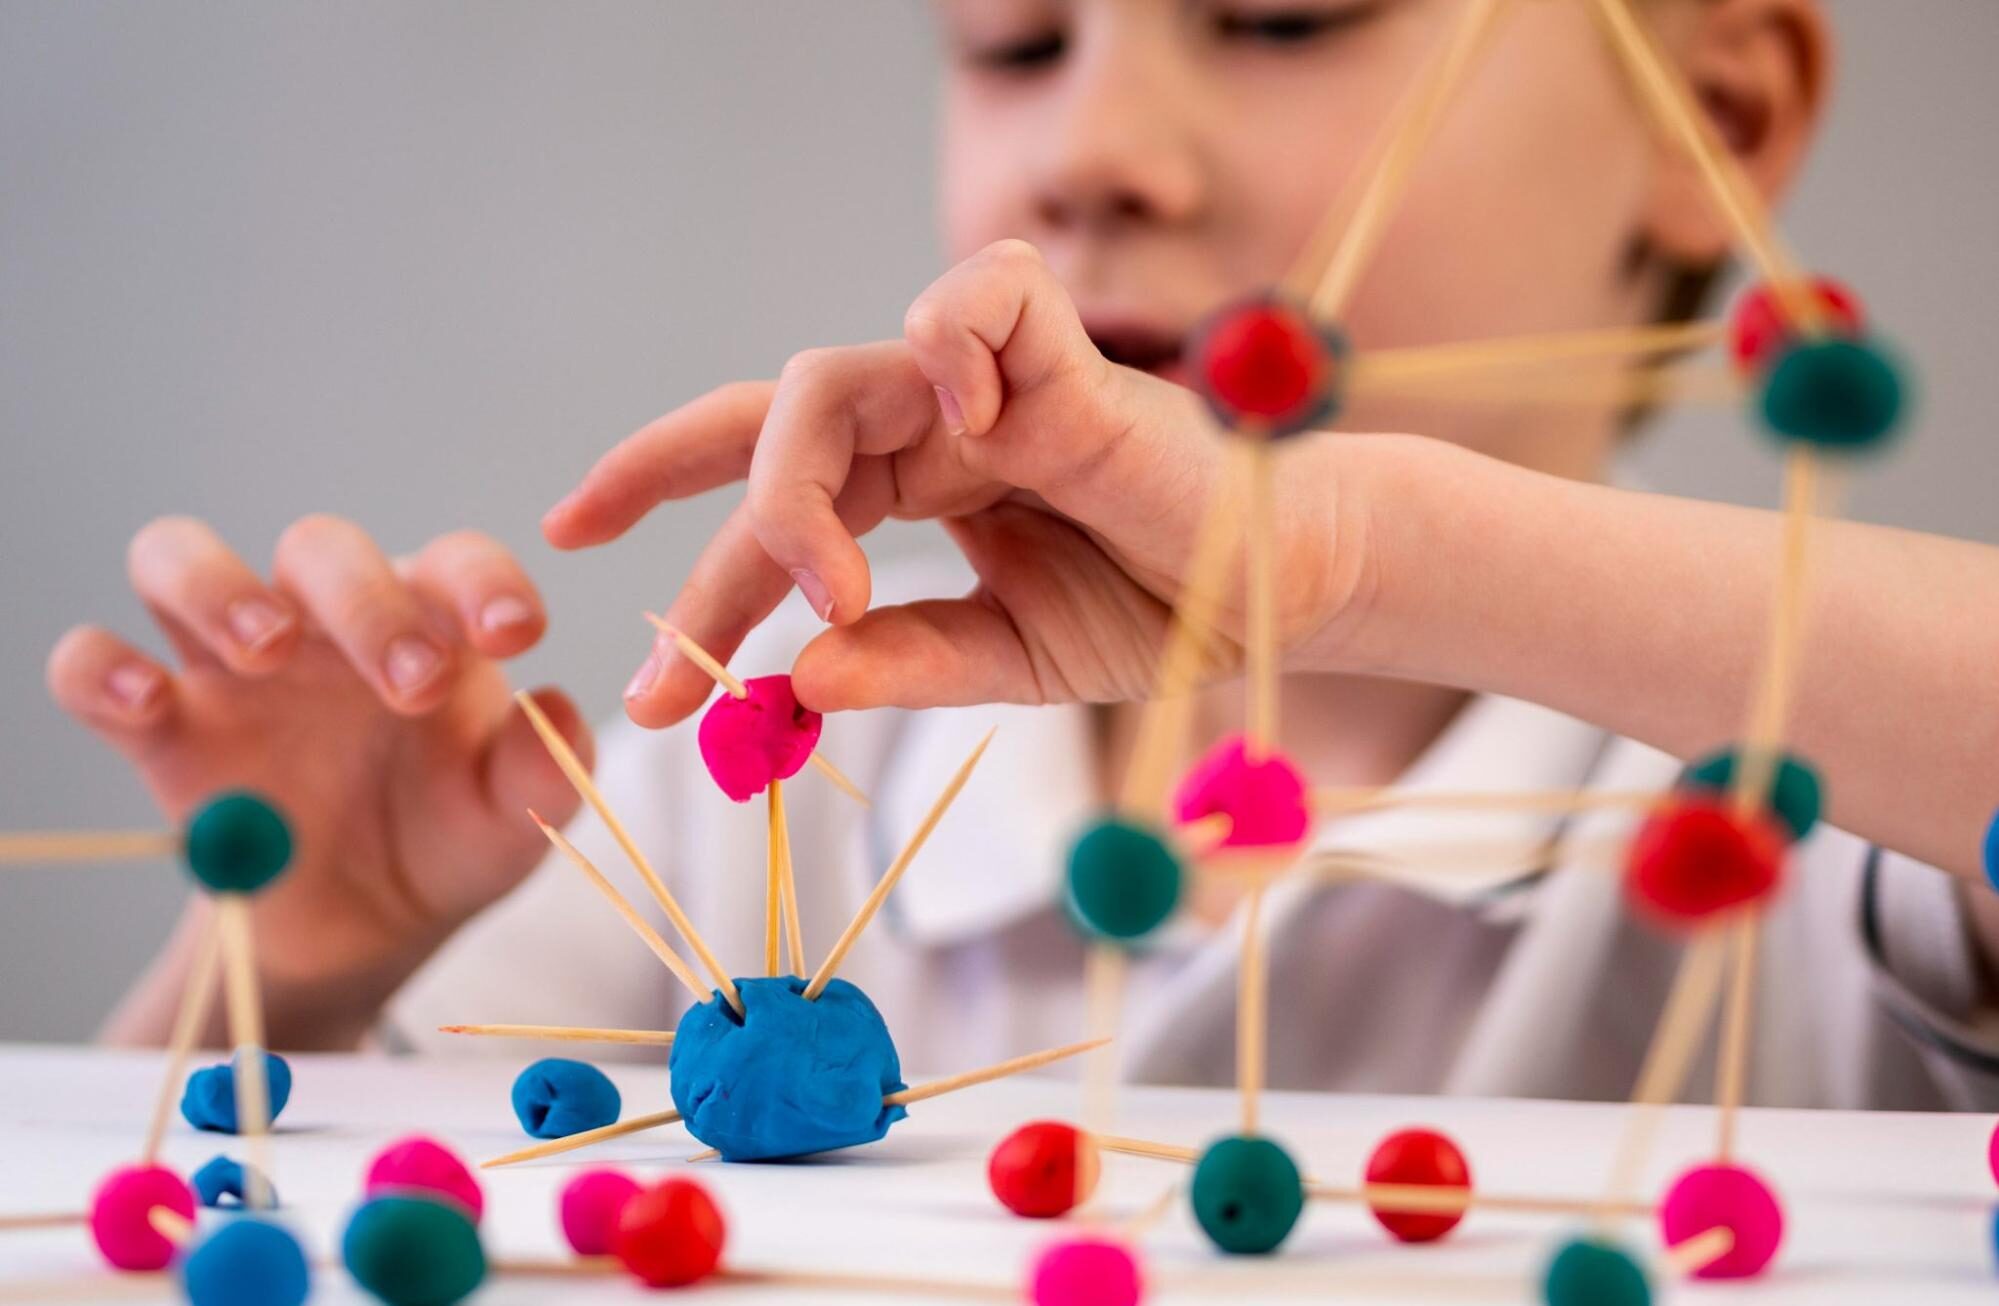 Help your kid develop life skills by working on their Fine Motor Skills